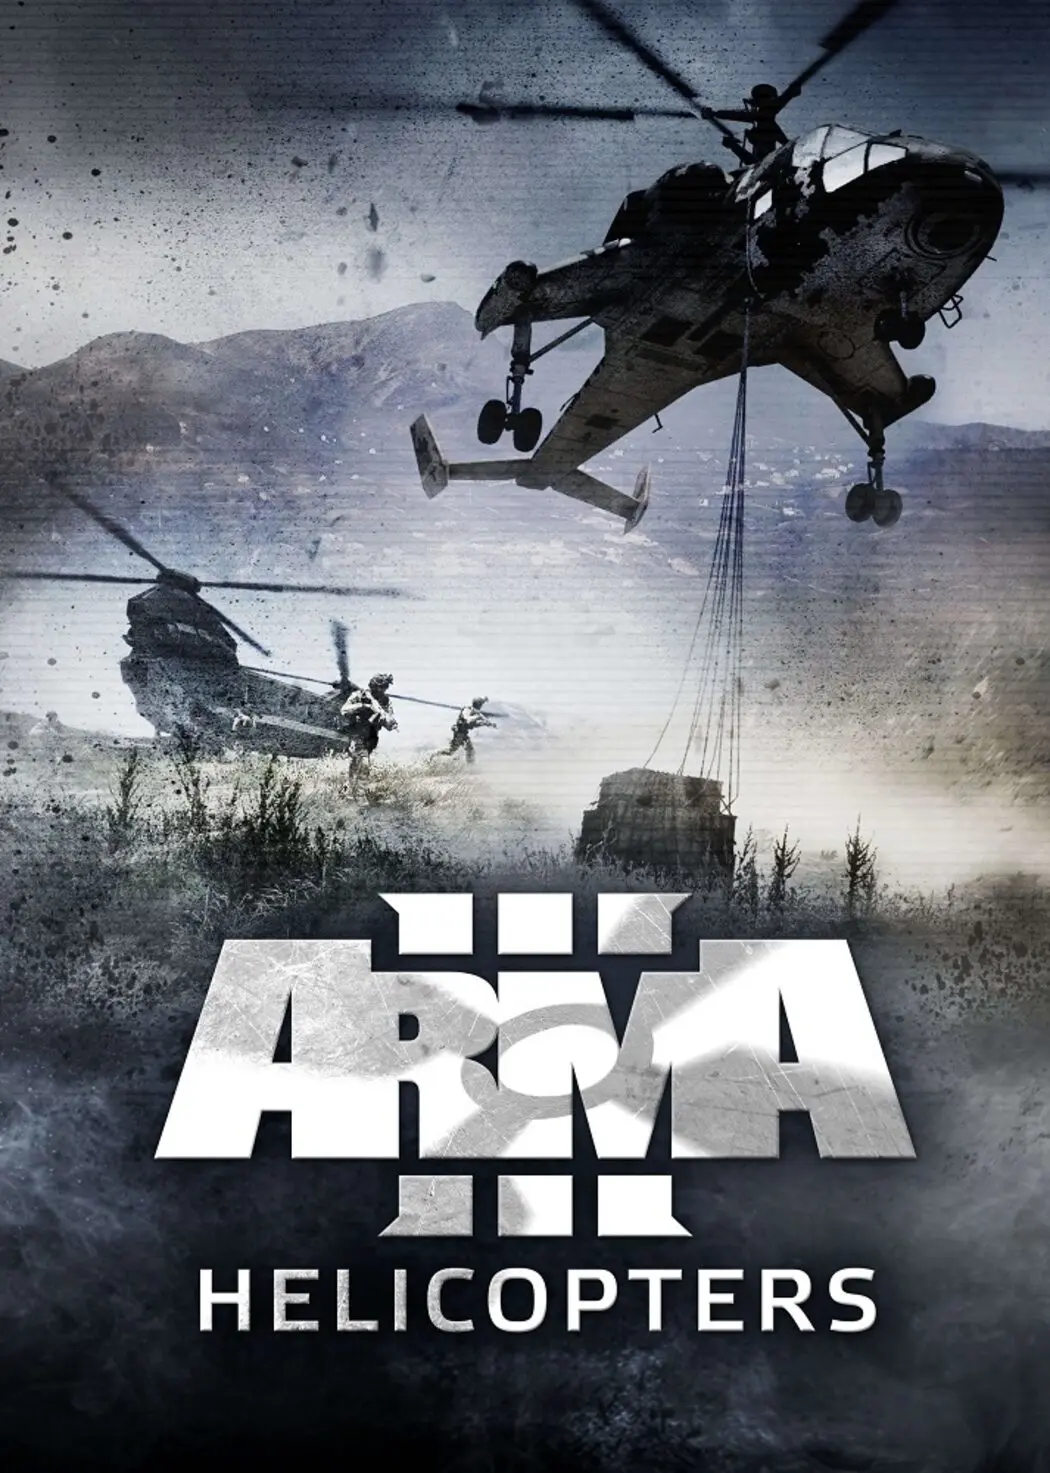 Arma 3 - Helicopters DLC (PC) - Steam - Digital Code